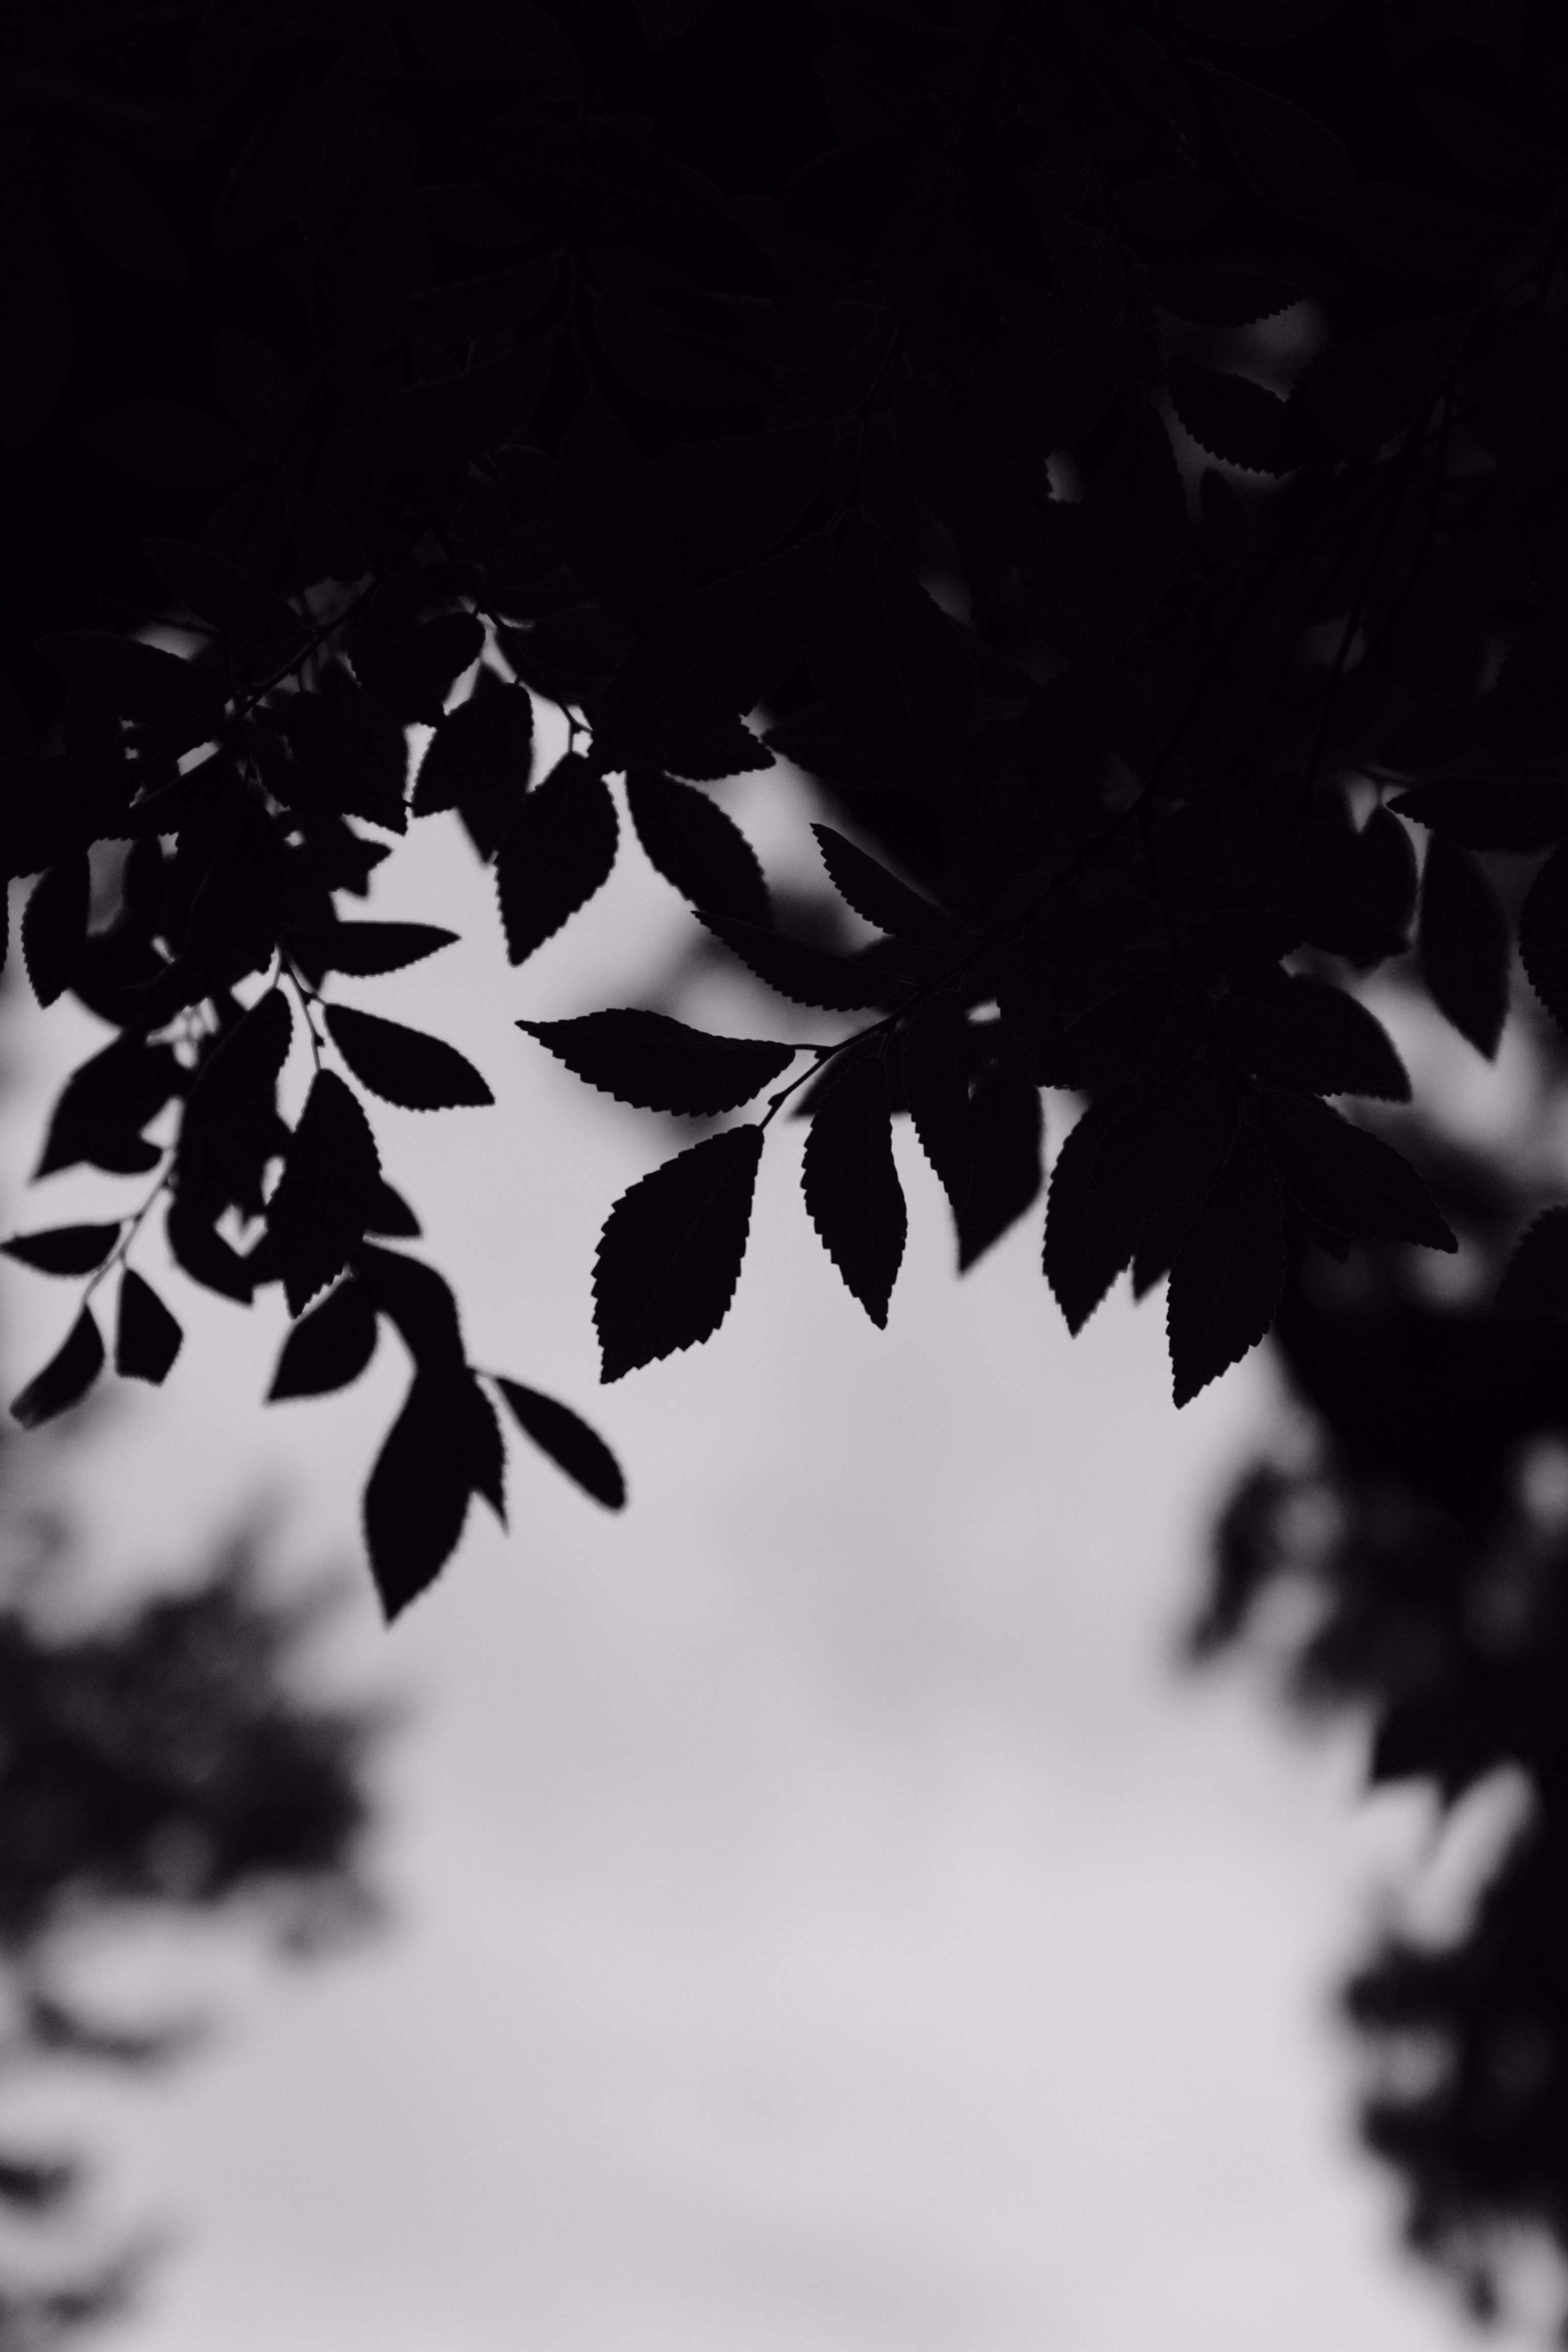 outlines, black, chb, leaves, branches, bw